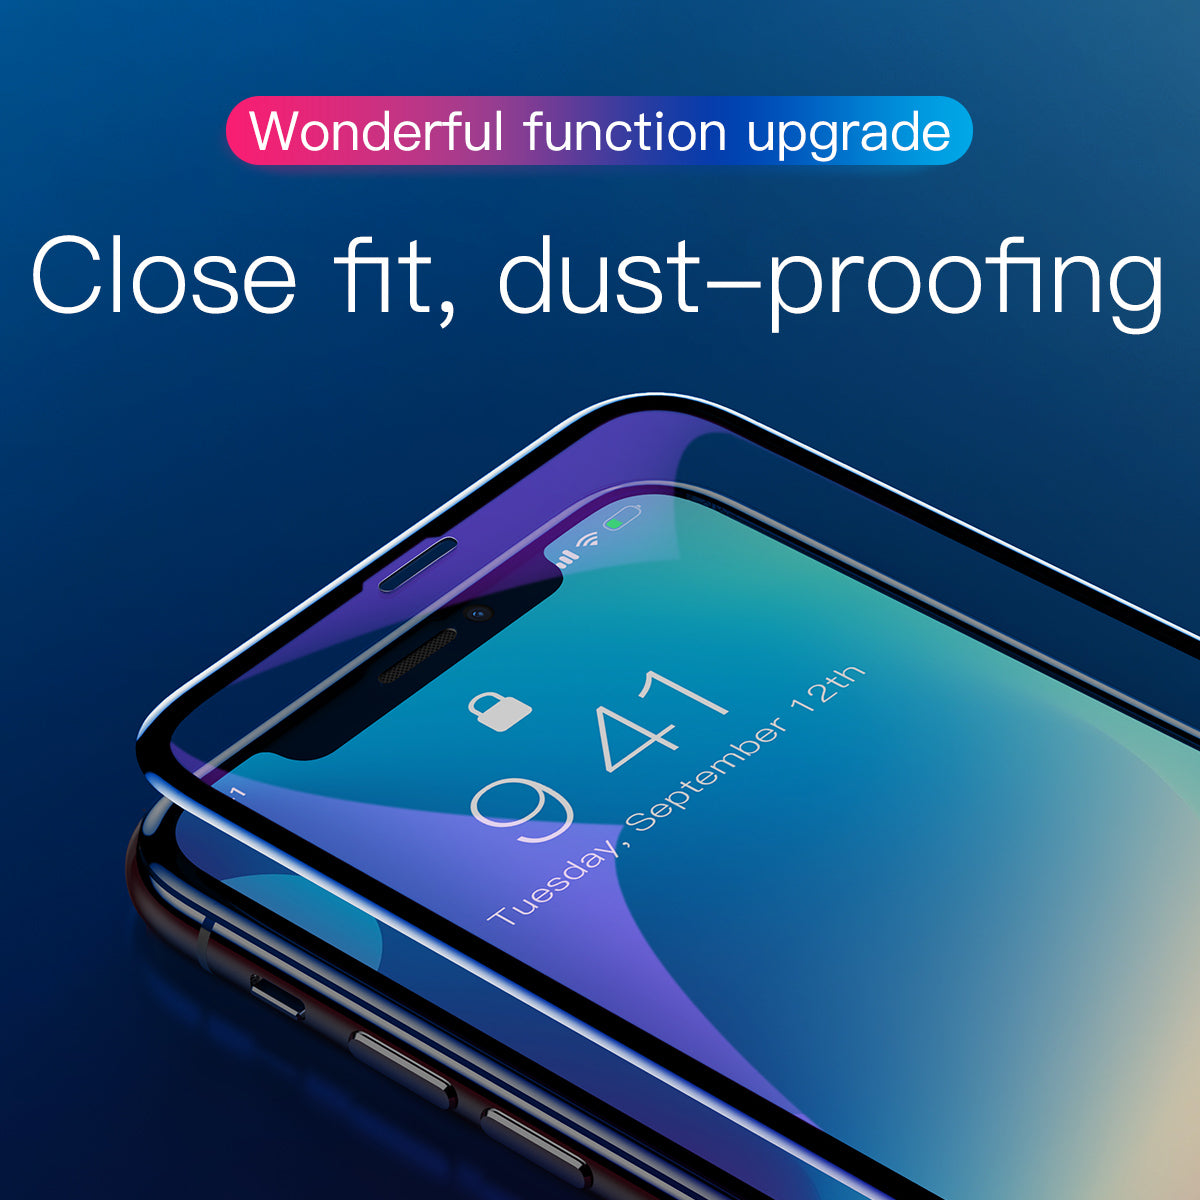 Baseus 0.3mm Rigid-edge Curved-Screen Tempered Glass Screen Protector with Anti-Blue Light For iPhone XS Max/11 Pro Max (SGAPIPH65-BJG01)